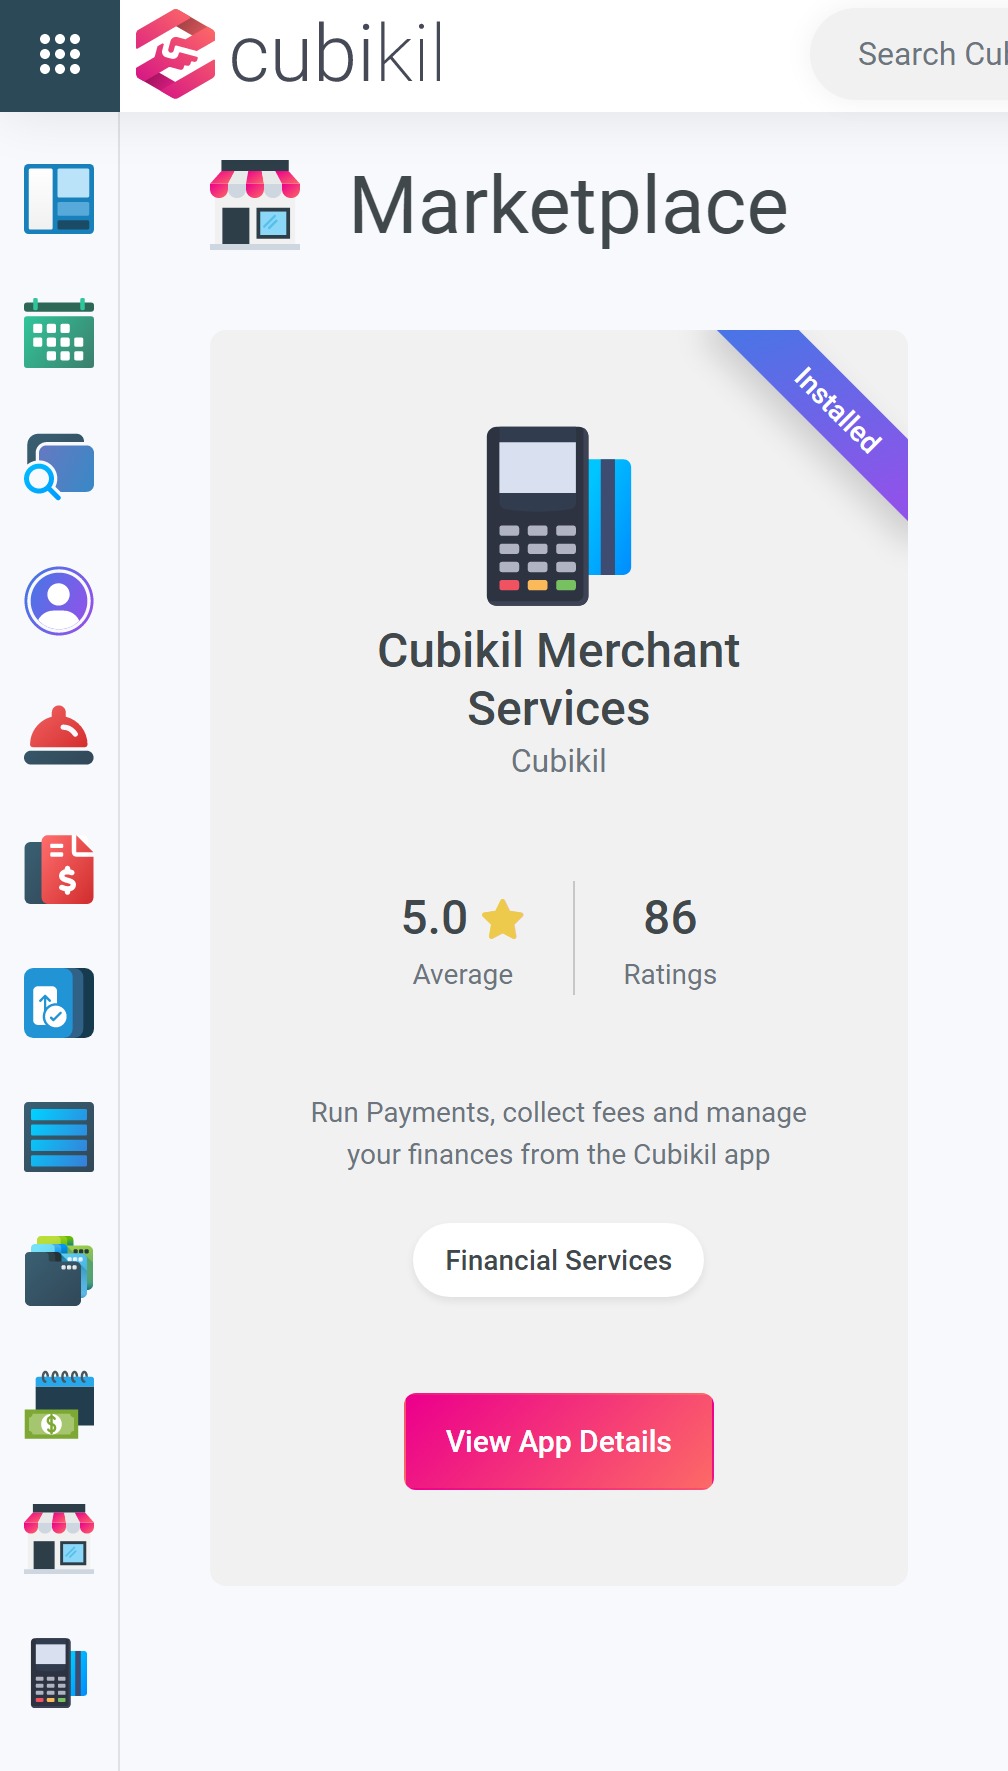 Cubikil boast a full-force marketplace that allows you to install multiple cloud-based apps. This screenshot showcases Cubikil Merchant Services. Cubikil Merchant Services allows you to easily accept and form of payment from Credit Cards to Bank Draft to 